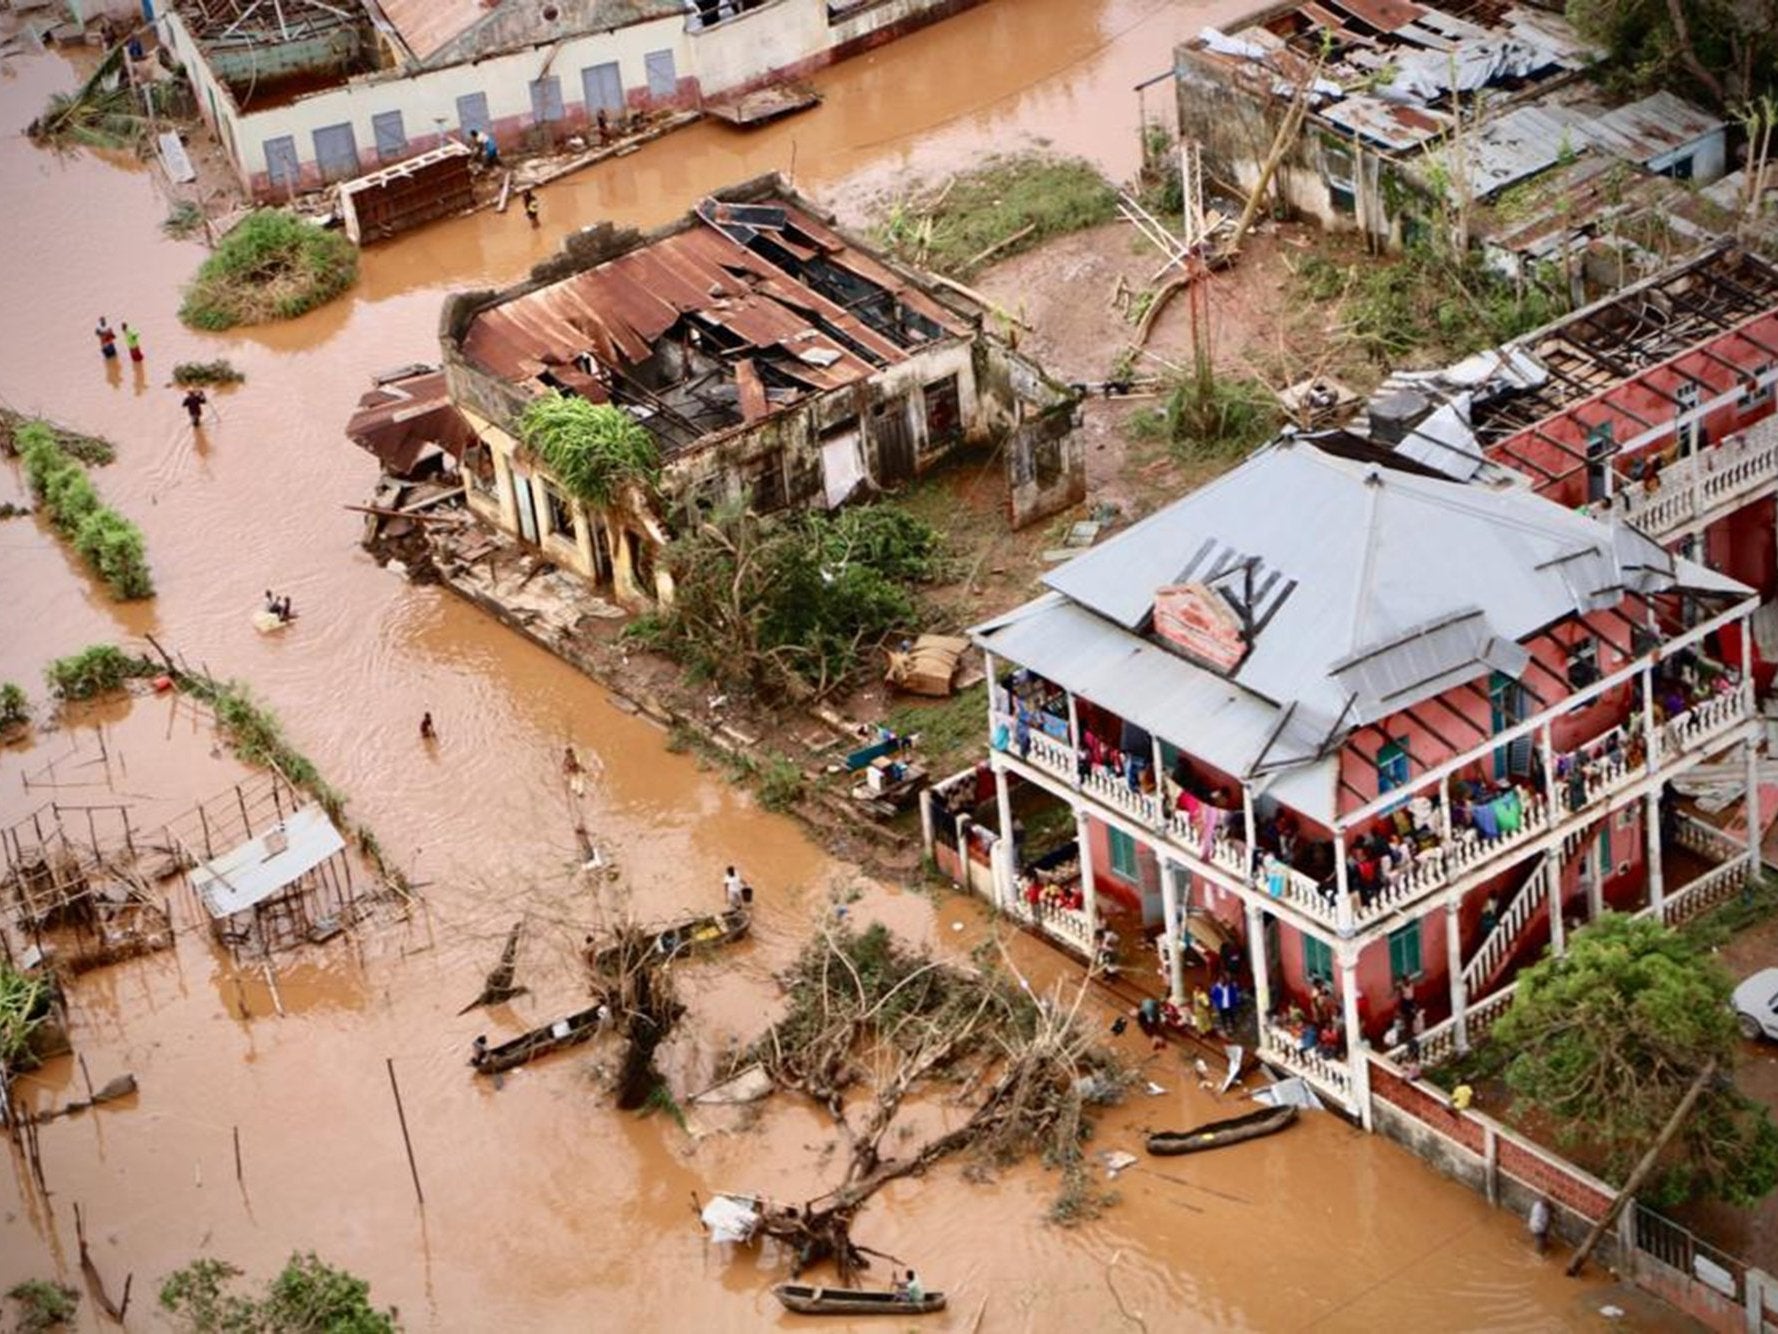 Cyclone Idai: &apos;Death all over&apos; as floods wipe out &apos;evidence houses were ever here&apos;